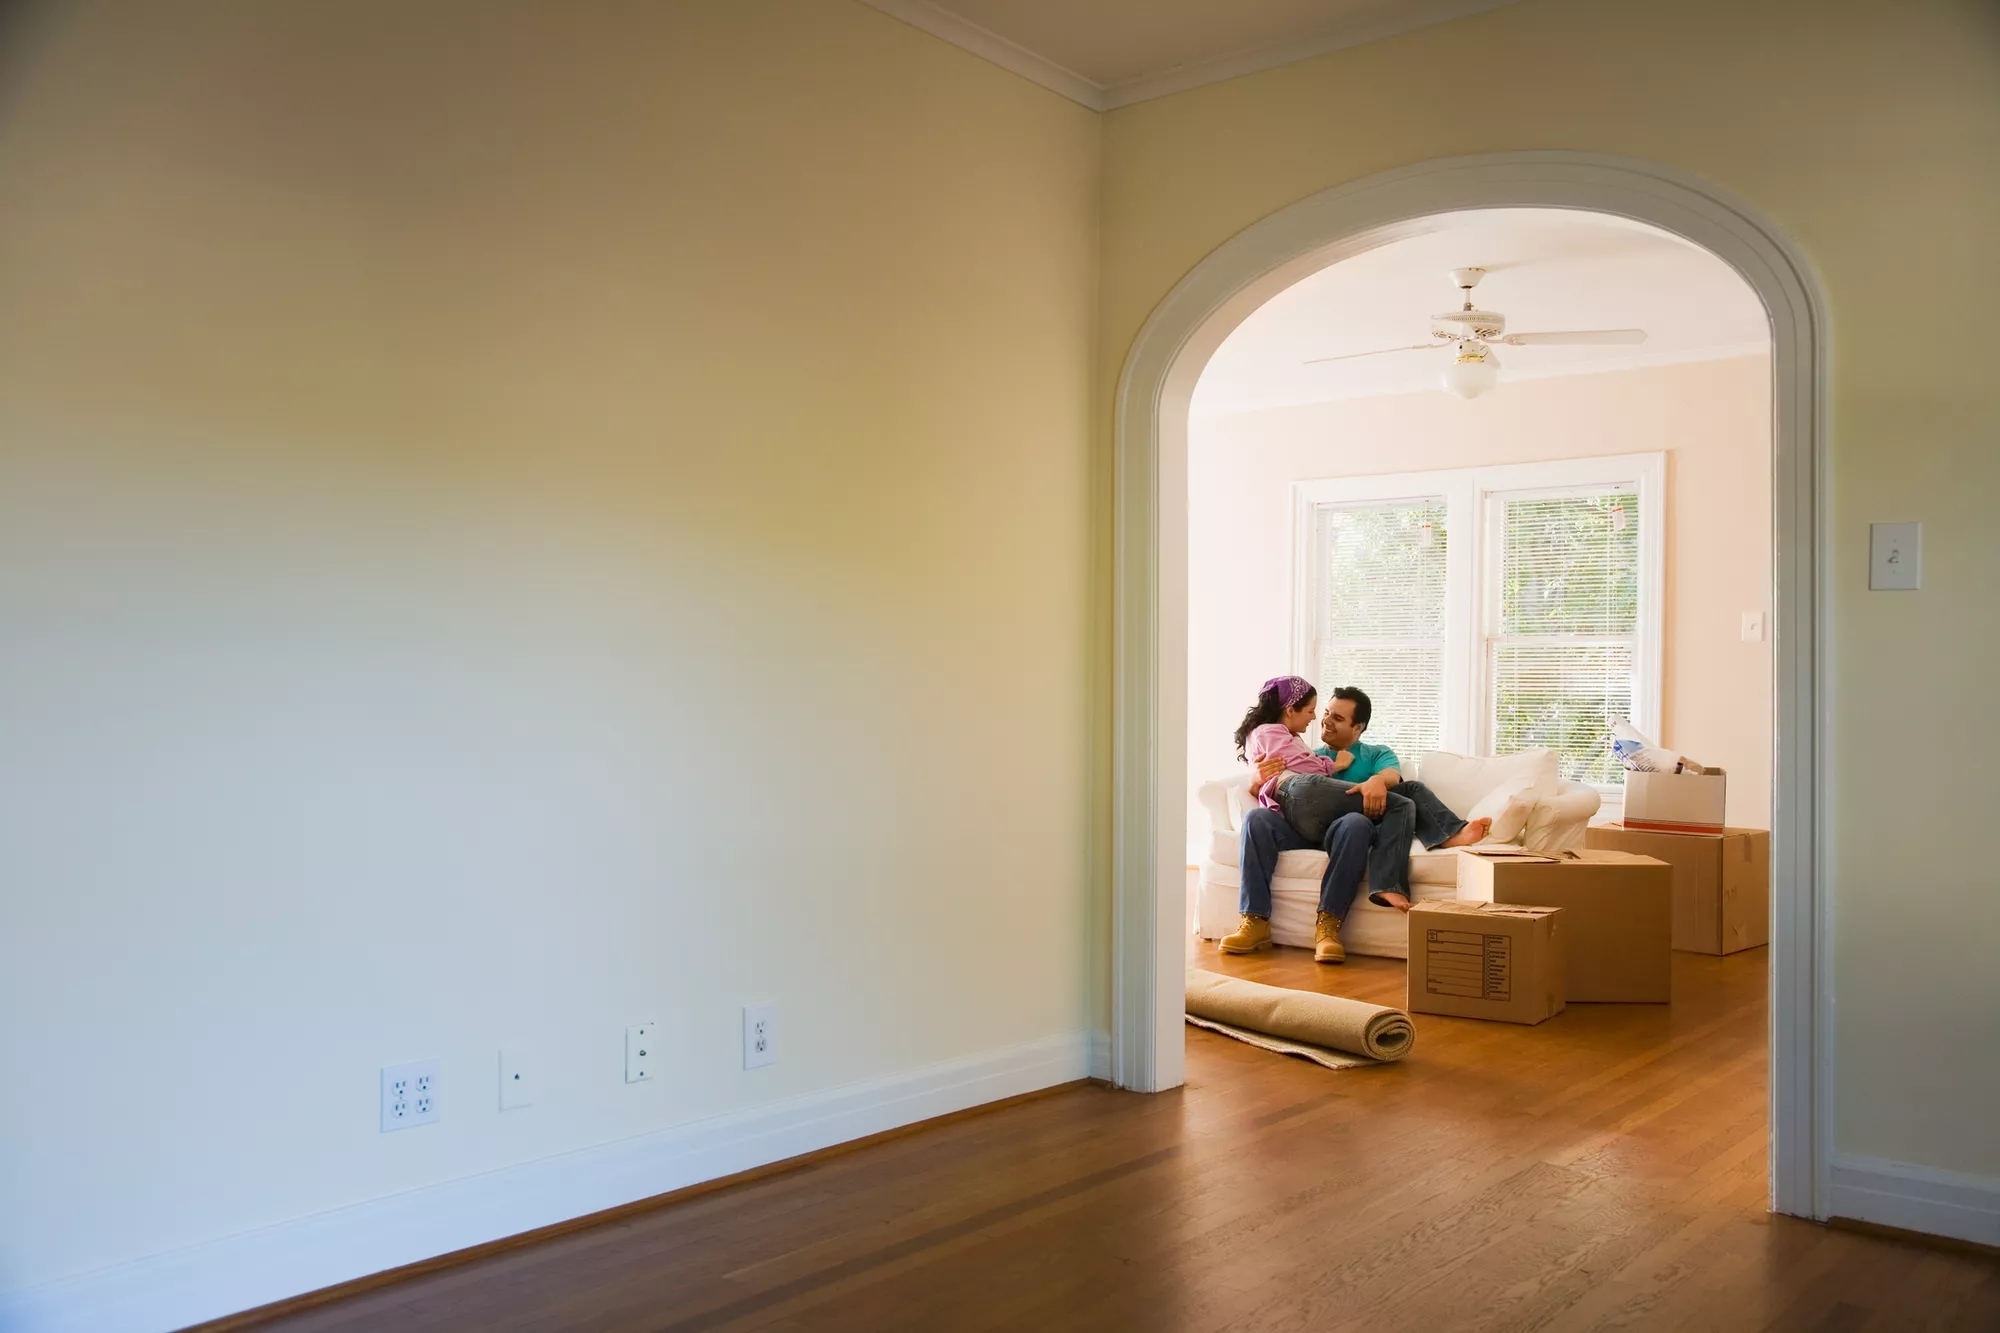 Two people sitting together on a couch through a doorway in a mostly empty hardwood house. The scene is bright and uplifting.